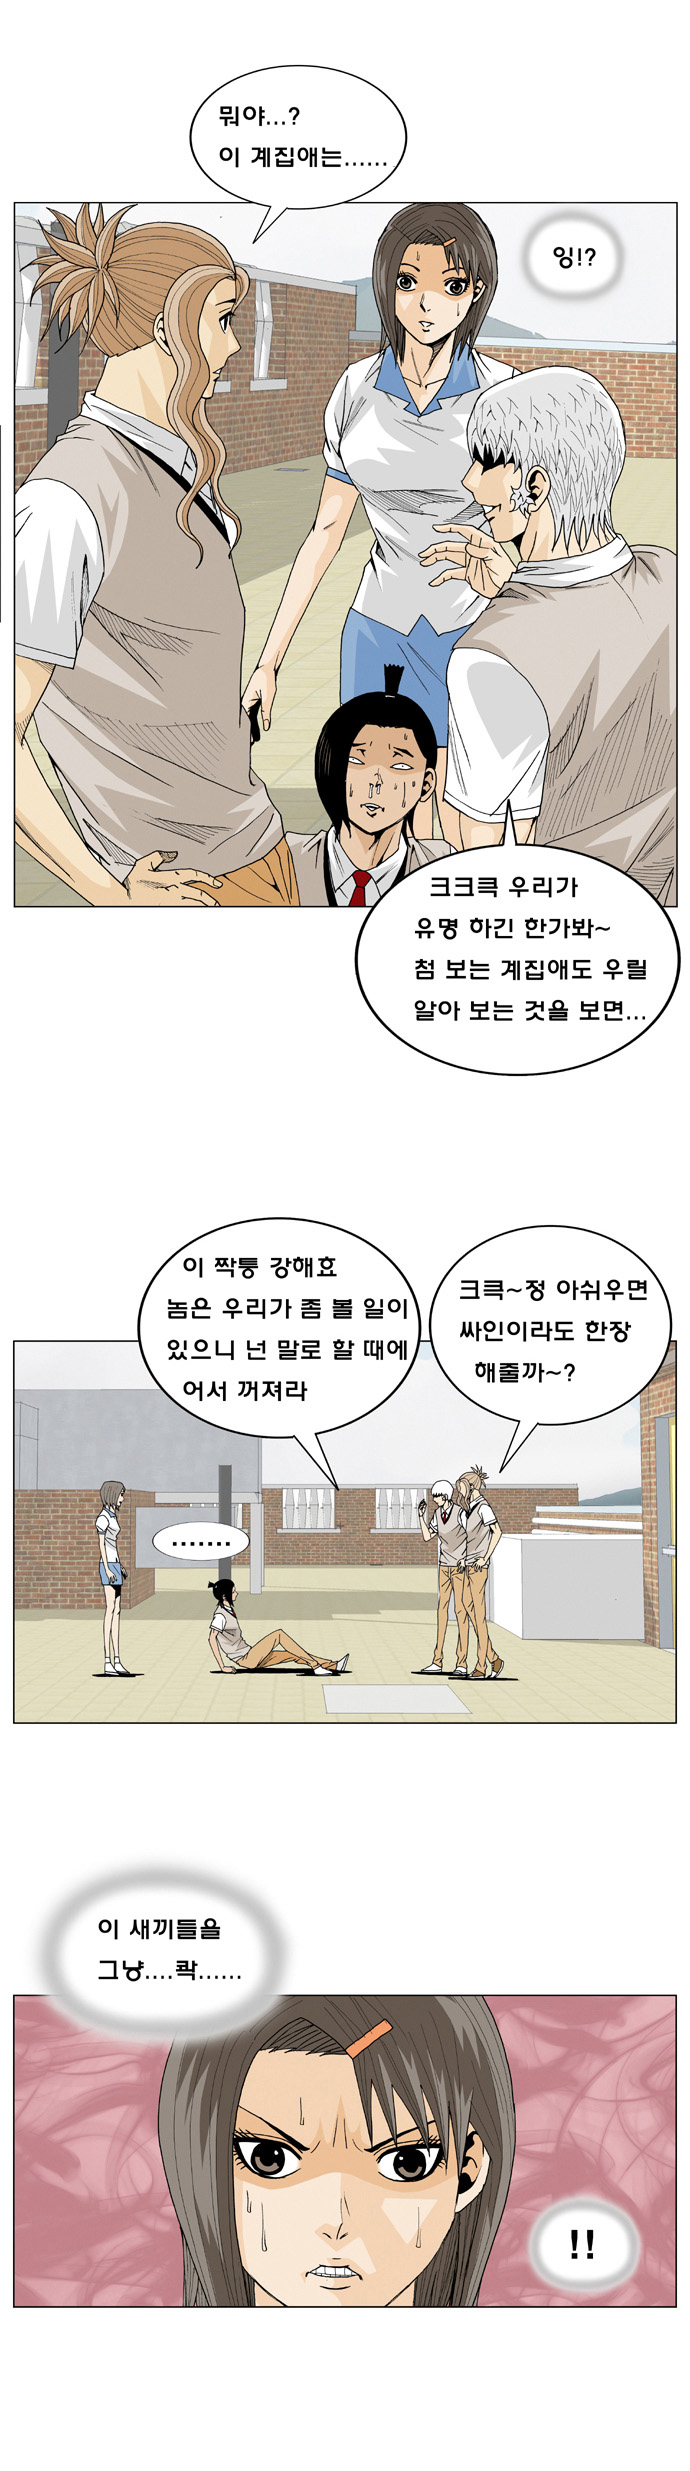 Ultimate Legend - Kang Hae Hyo - Chapter 10 - Page 5